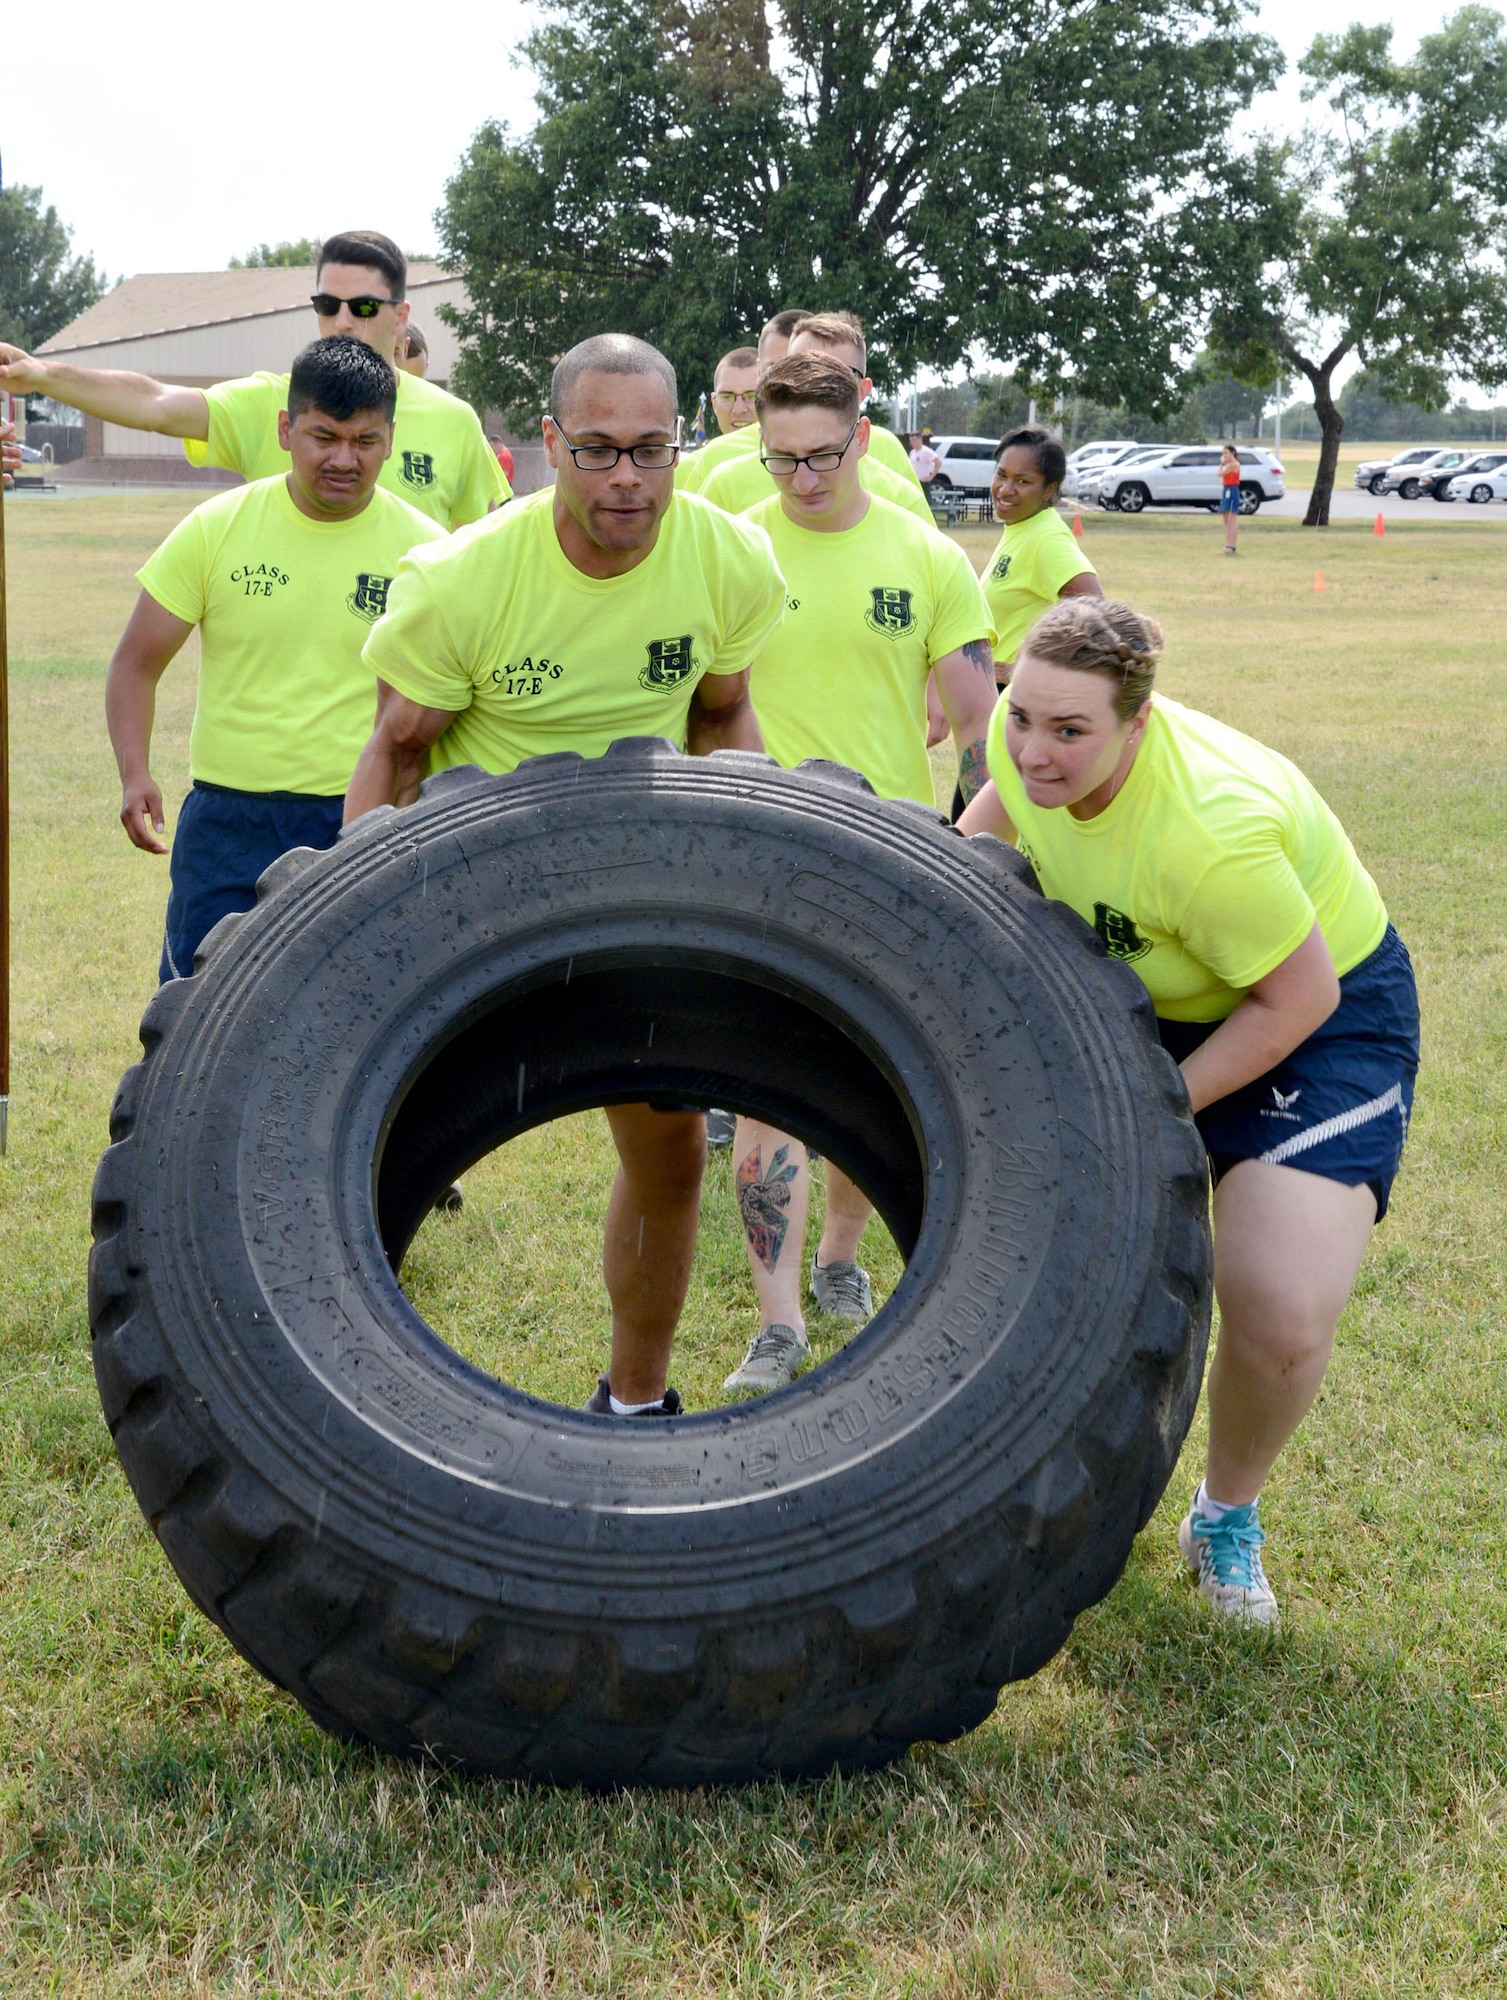 Senior Airmen Shane Sergent, 72nd Security Forces Squadron, and Julianna Divett, 507th Medical Squadron, work together to flip a tire during one of the stations in a Commandant’s PT exercise. Differing from regular PT exercises, the Commandant’s PT challenges apply curriculum that the students have studied, help promote team-building and help students observe strengths and weaknesses in themselves and each other, helping them to become stronger leaders. (Air Force photo by Kelly White)